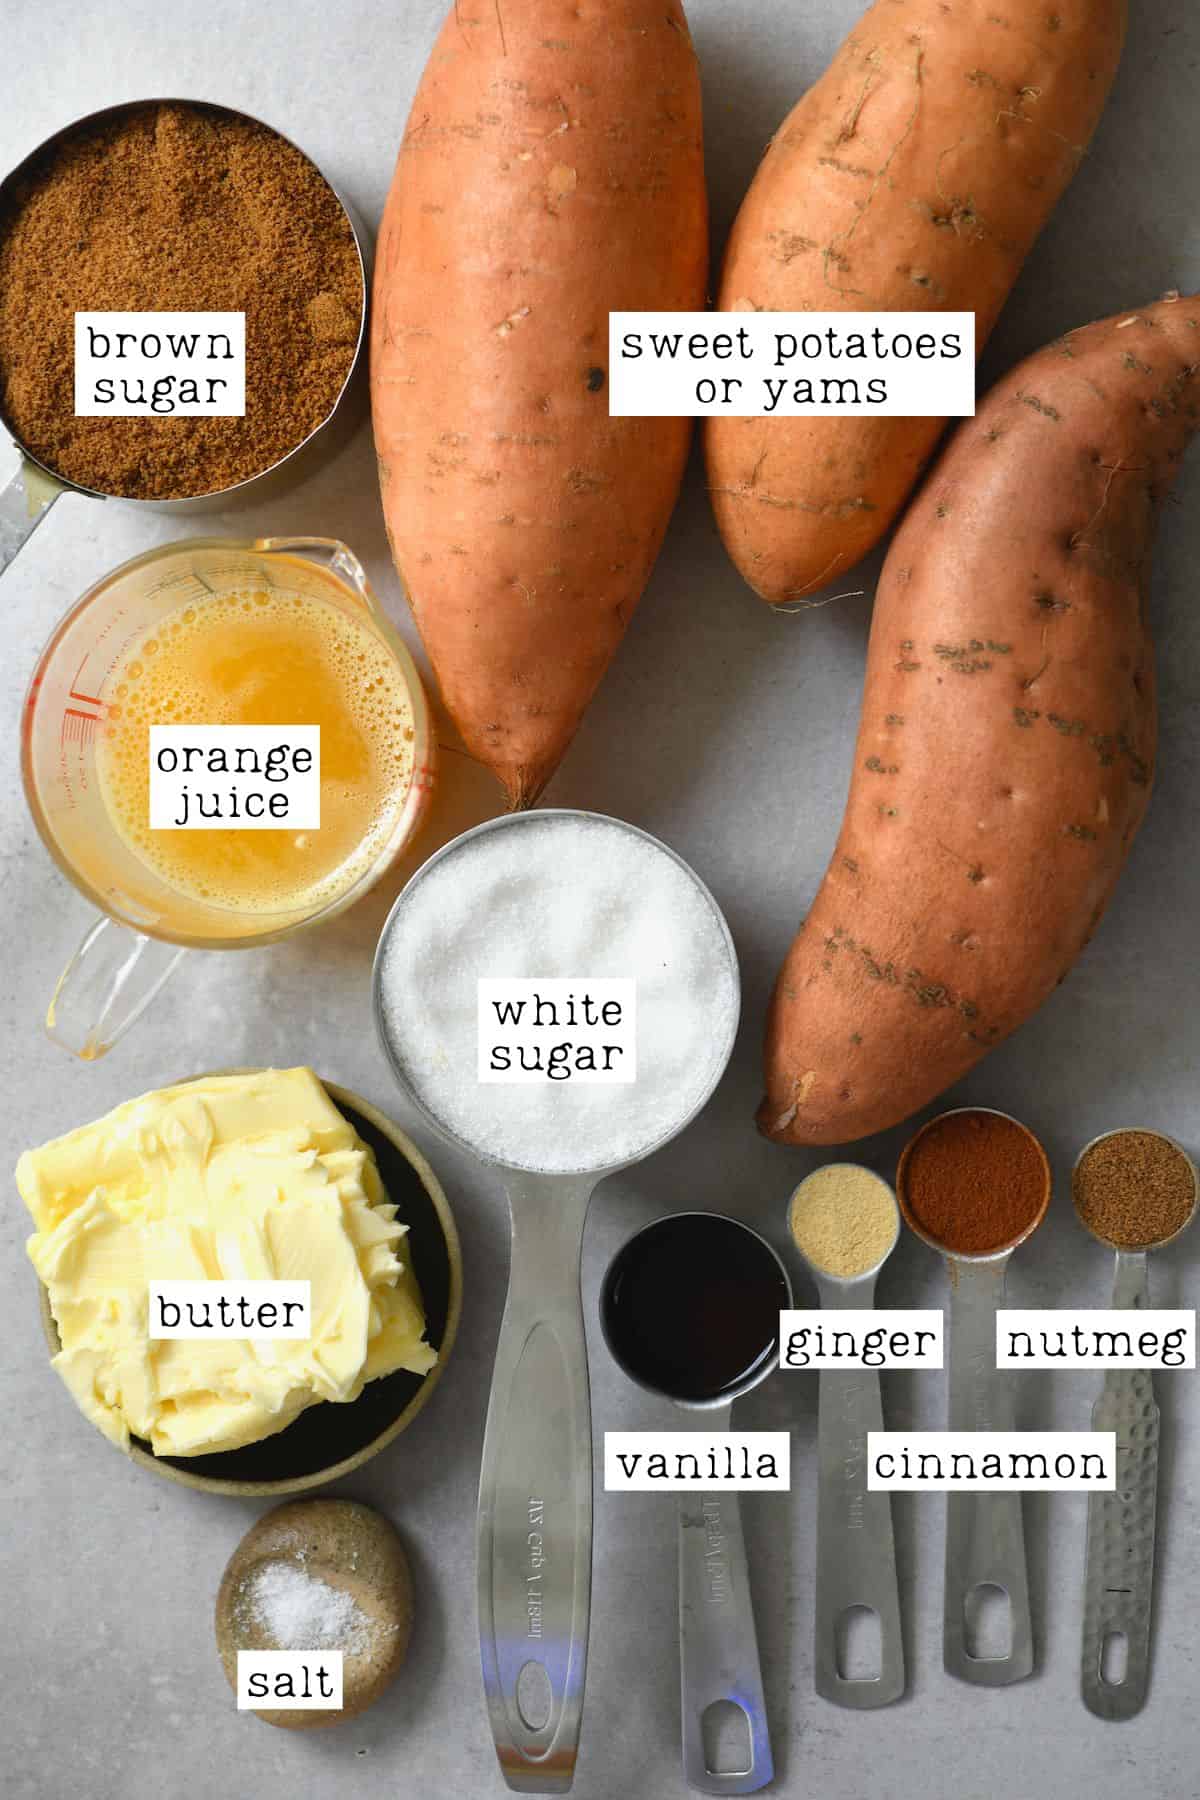 Ingredients for candied yams